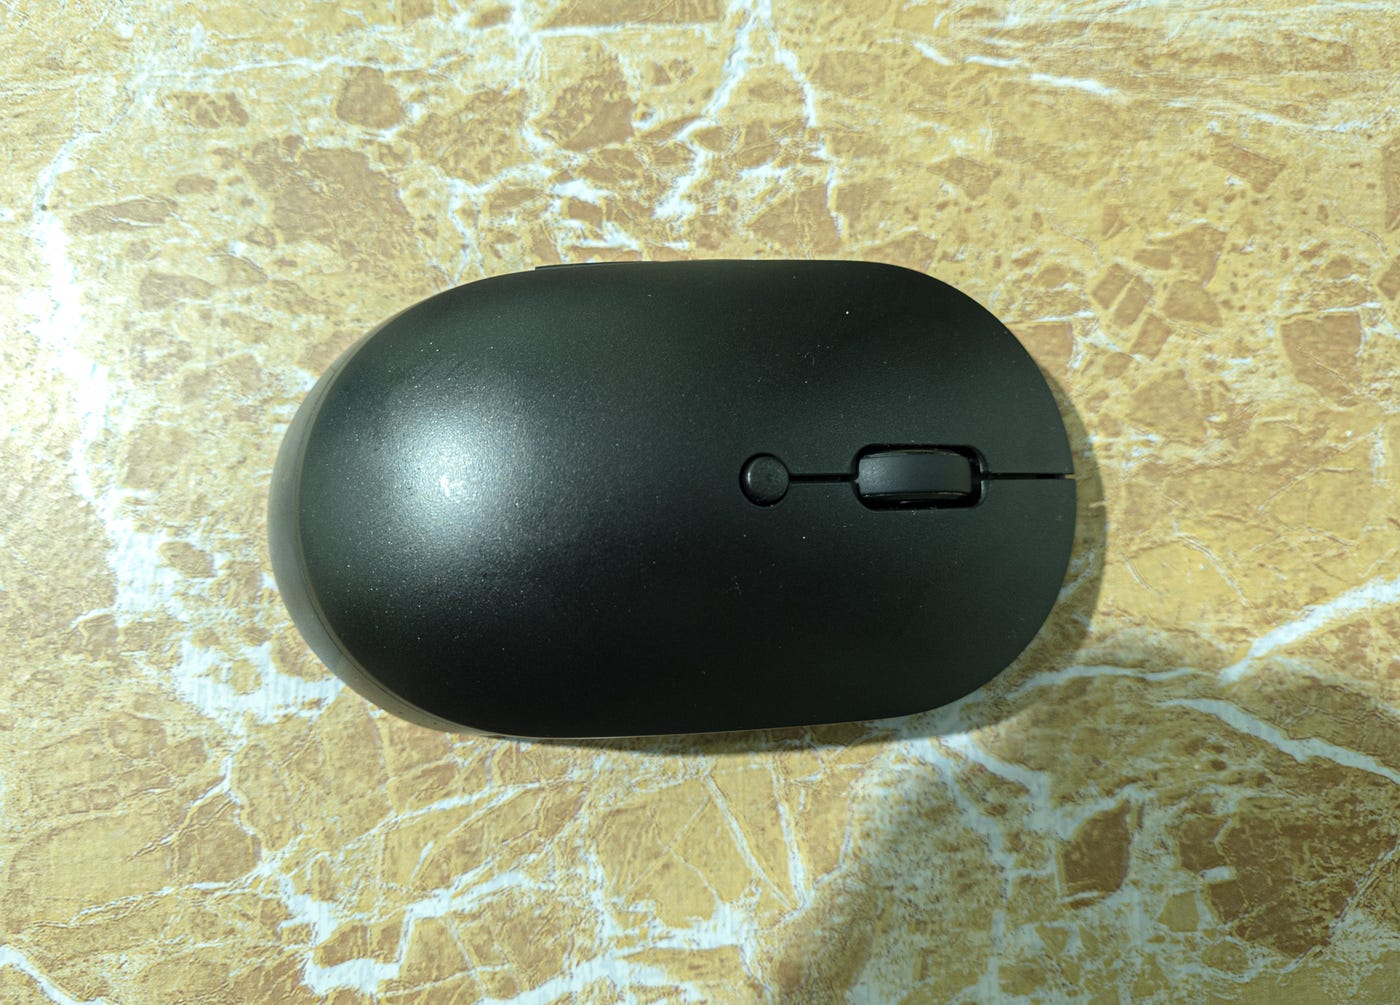 The Best Value Bluetooth Mouse (15$): Xiaomi Mouse Silent Edition | by  Otmane Fettal | Medium